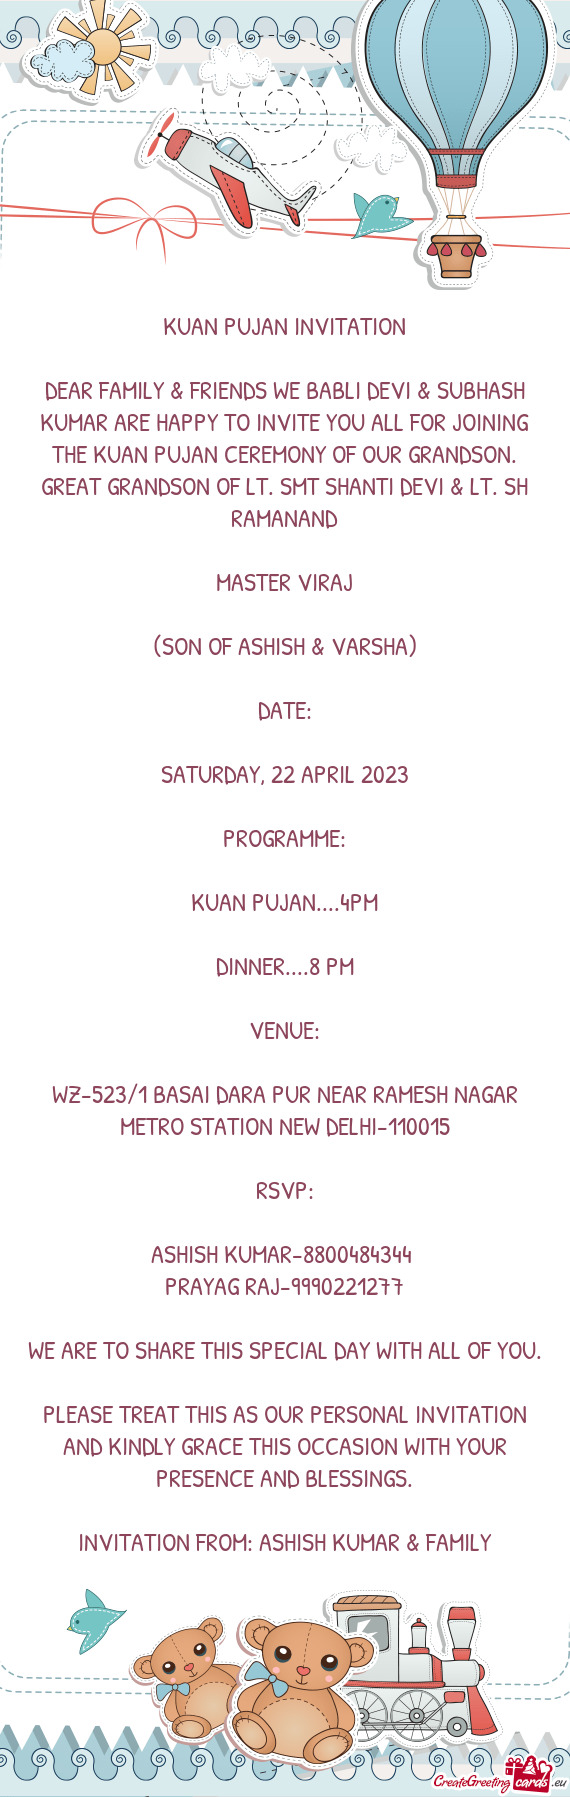 DEAR FAMILY & FRIENDS WE BABLI DEVI & SUBHASH KUMAR ARE HAPPY TO INVITE YOU ALL FOR JOINING THE KUAN